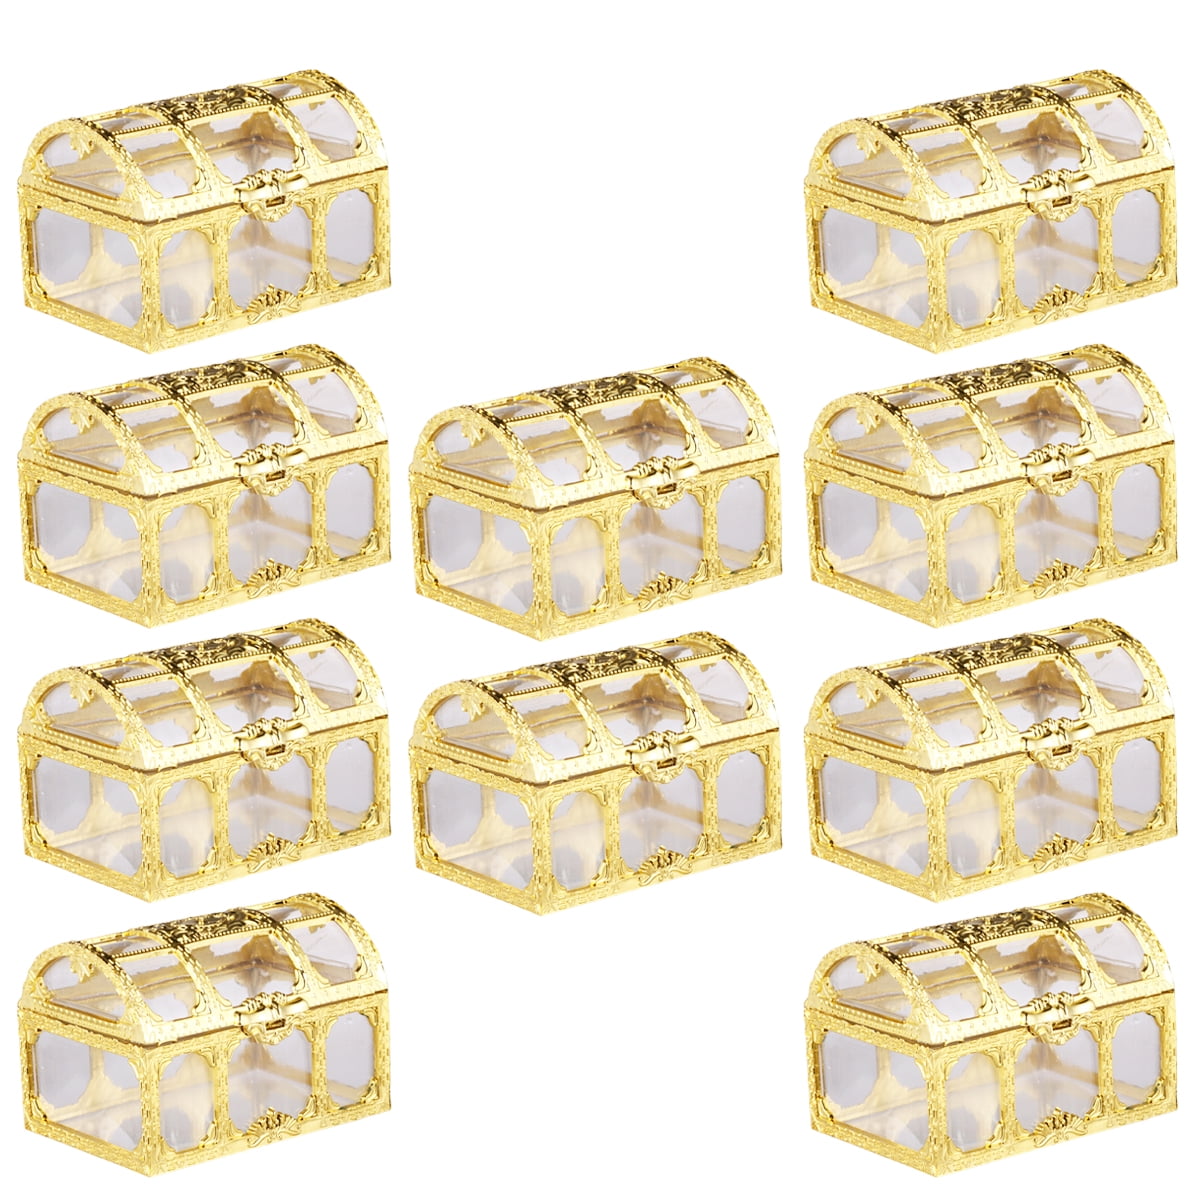 10pcs Candy Box Treasure Chest Shape Sugar Containers Holder Gift Storage 